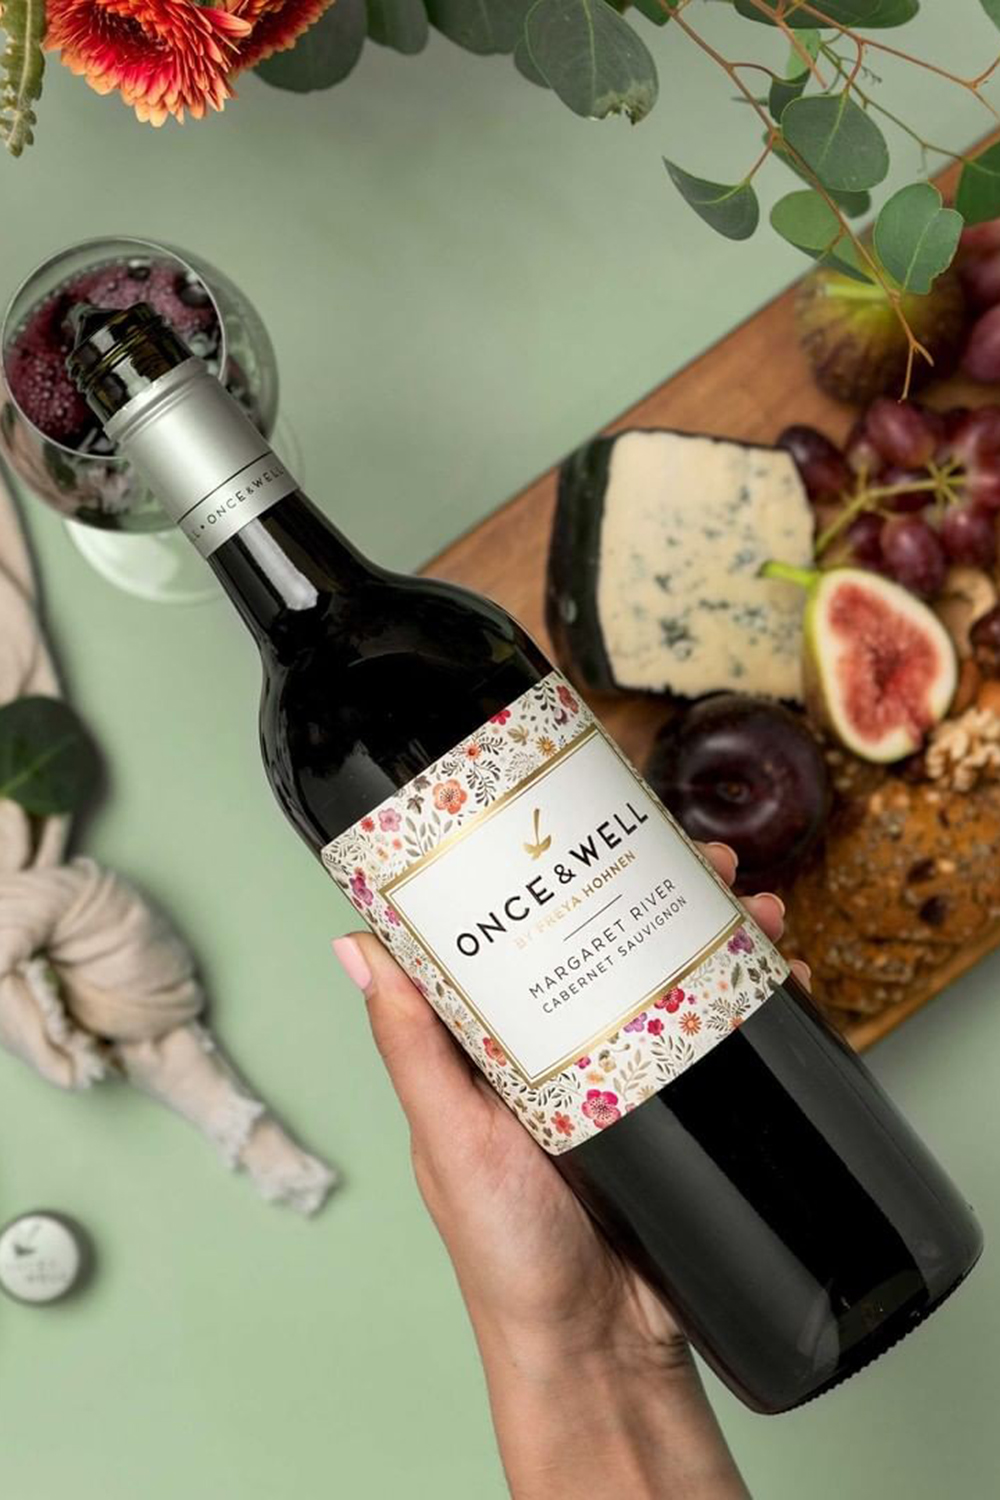 hand holding bottle of once and well cabernet wine with cheese and figs in background